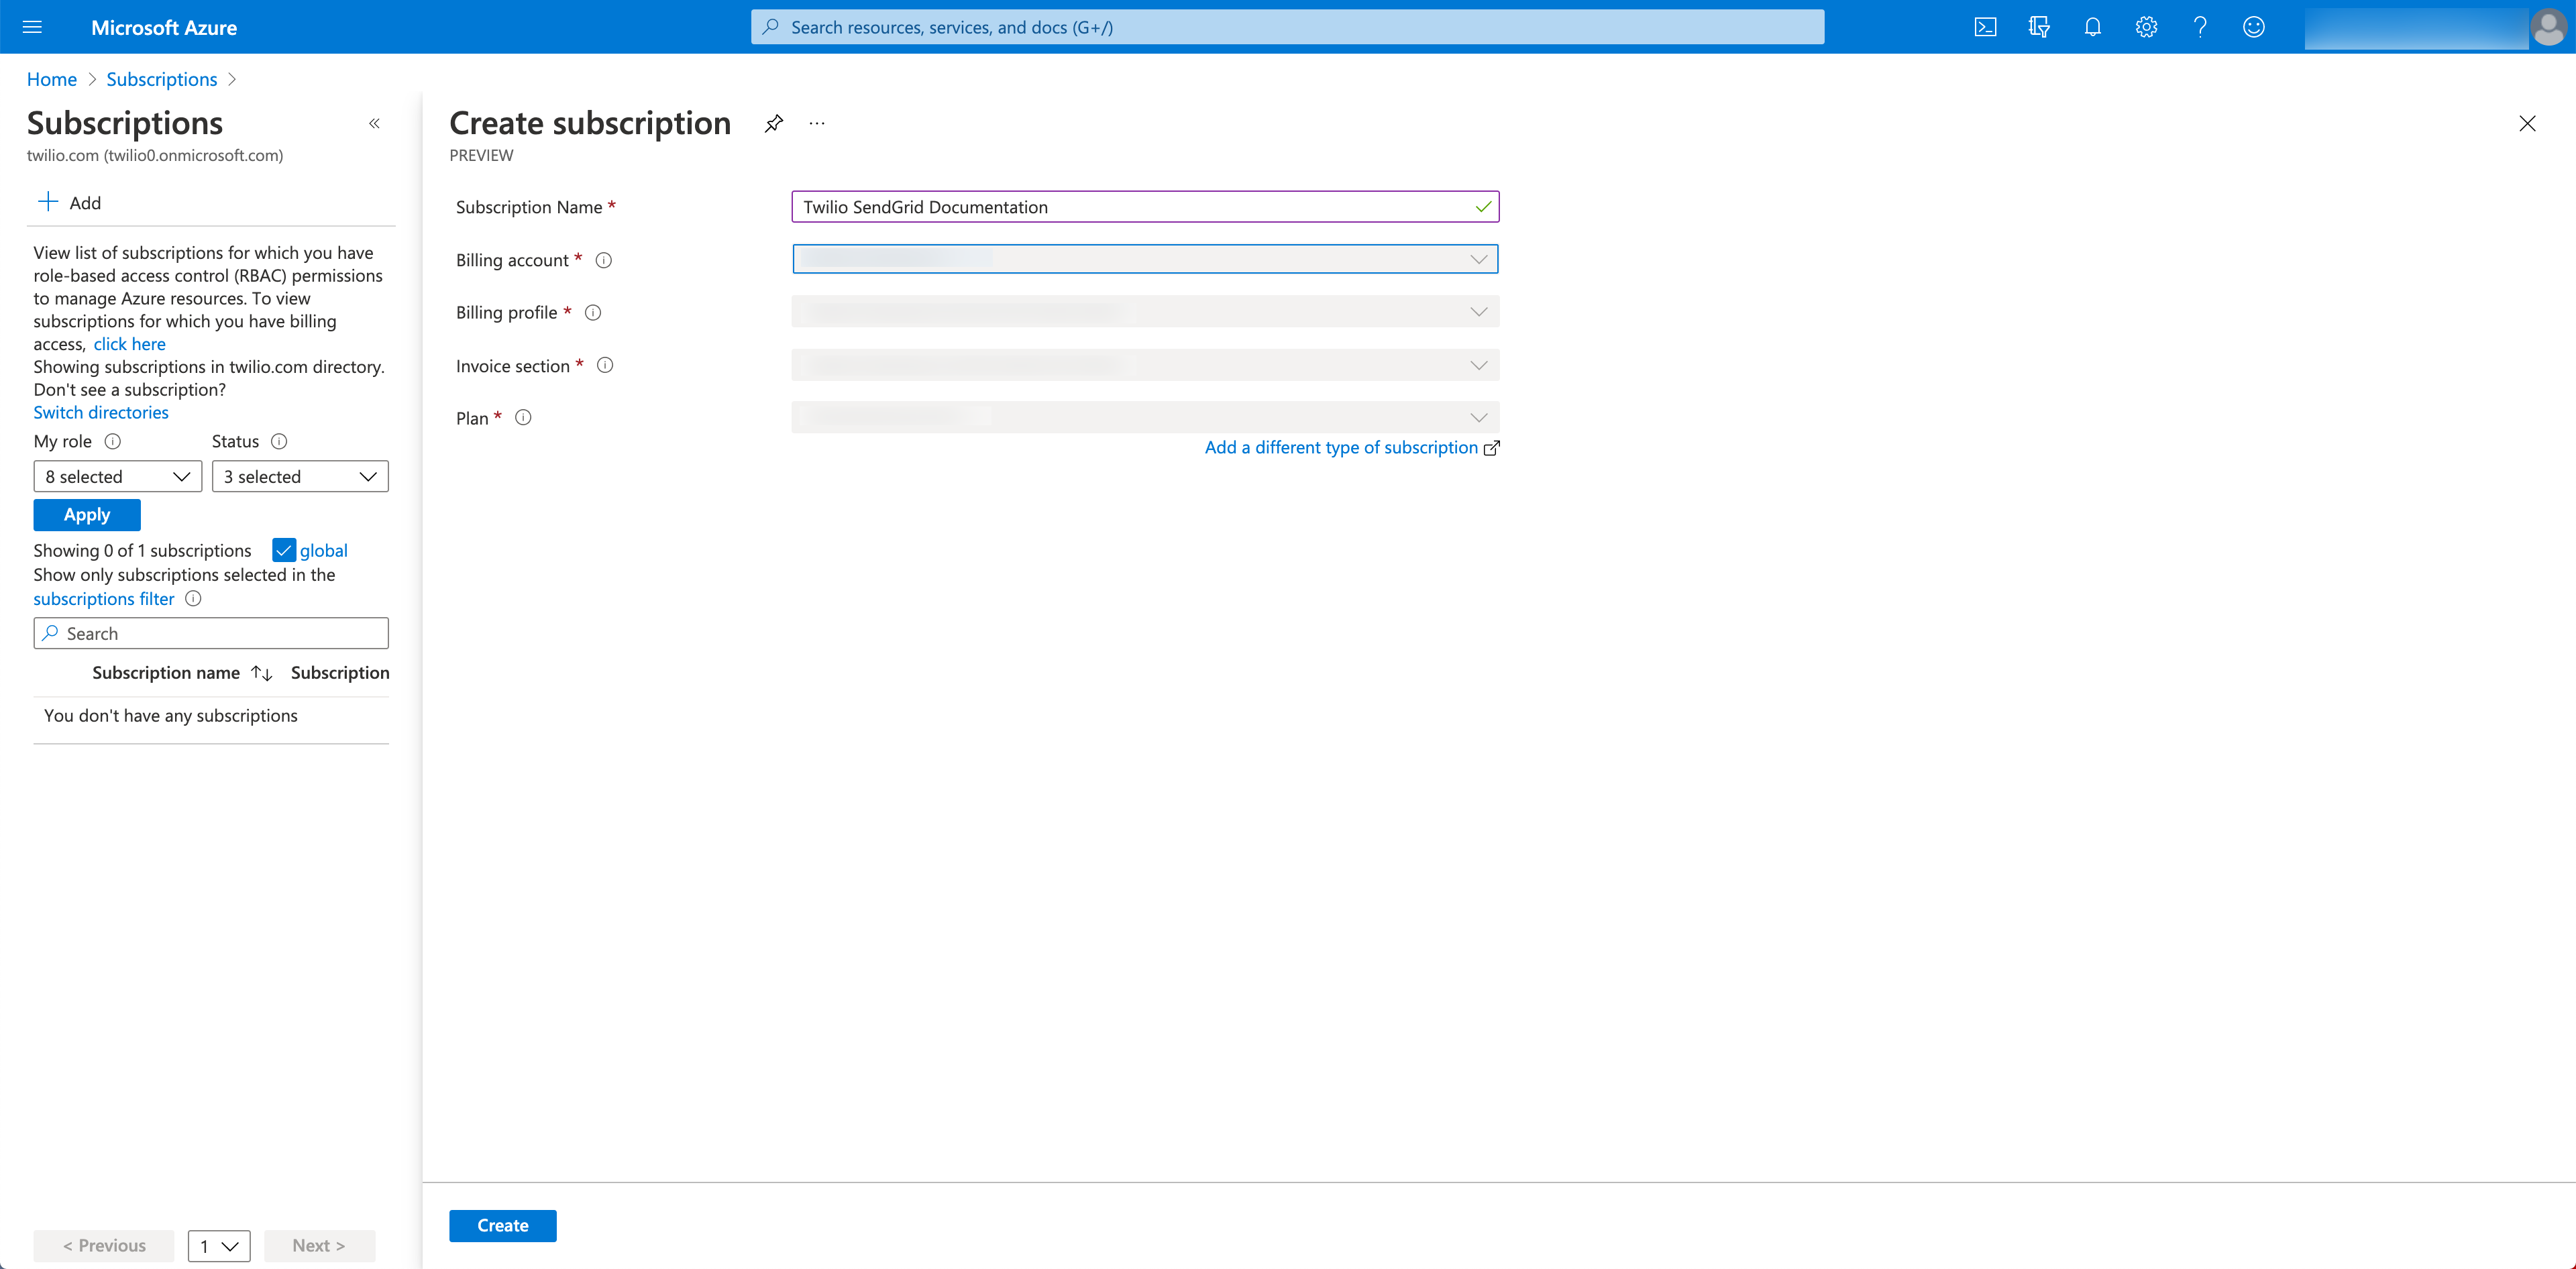 Azure Subscriptions form with the Subscription Name populated.